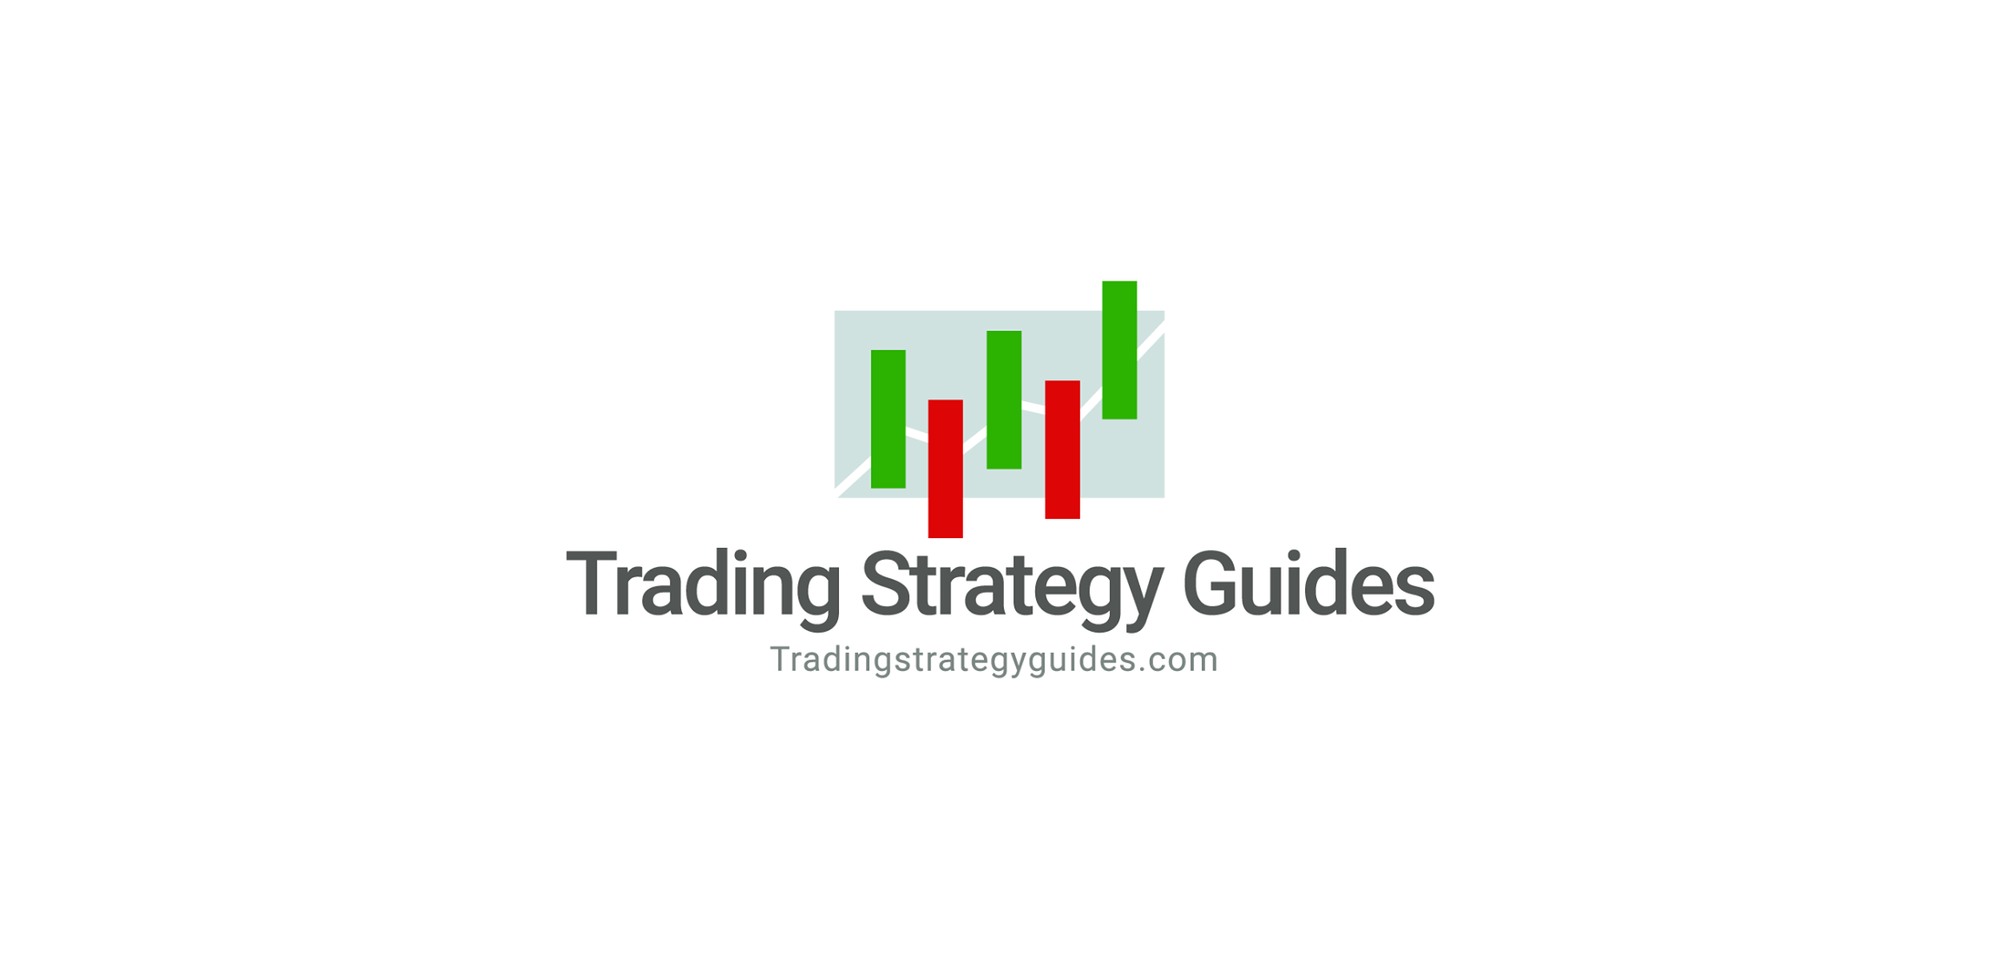 Trading Strategy Guides - Casey Stubbs